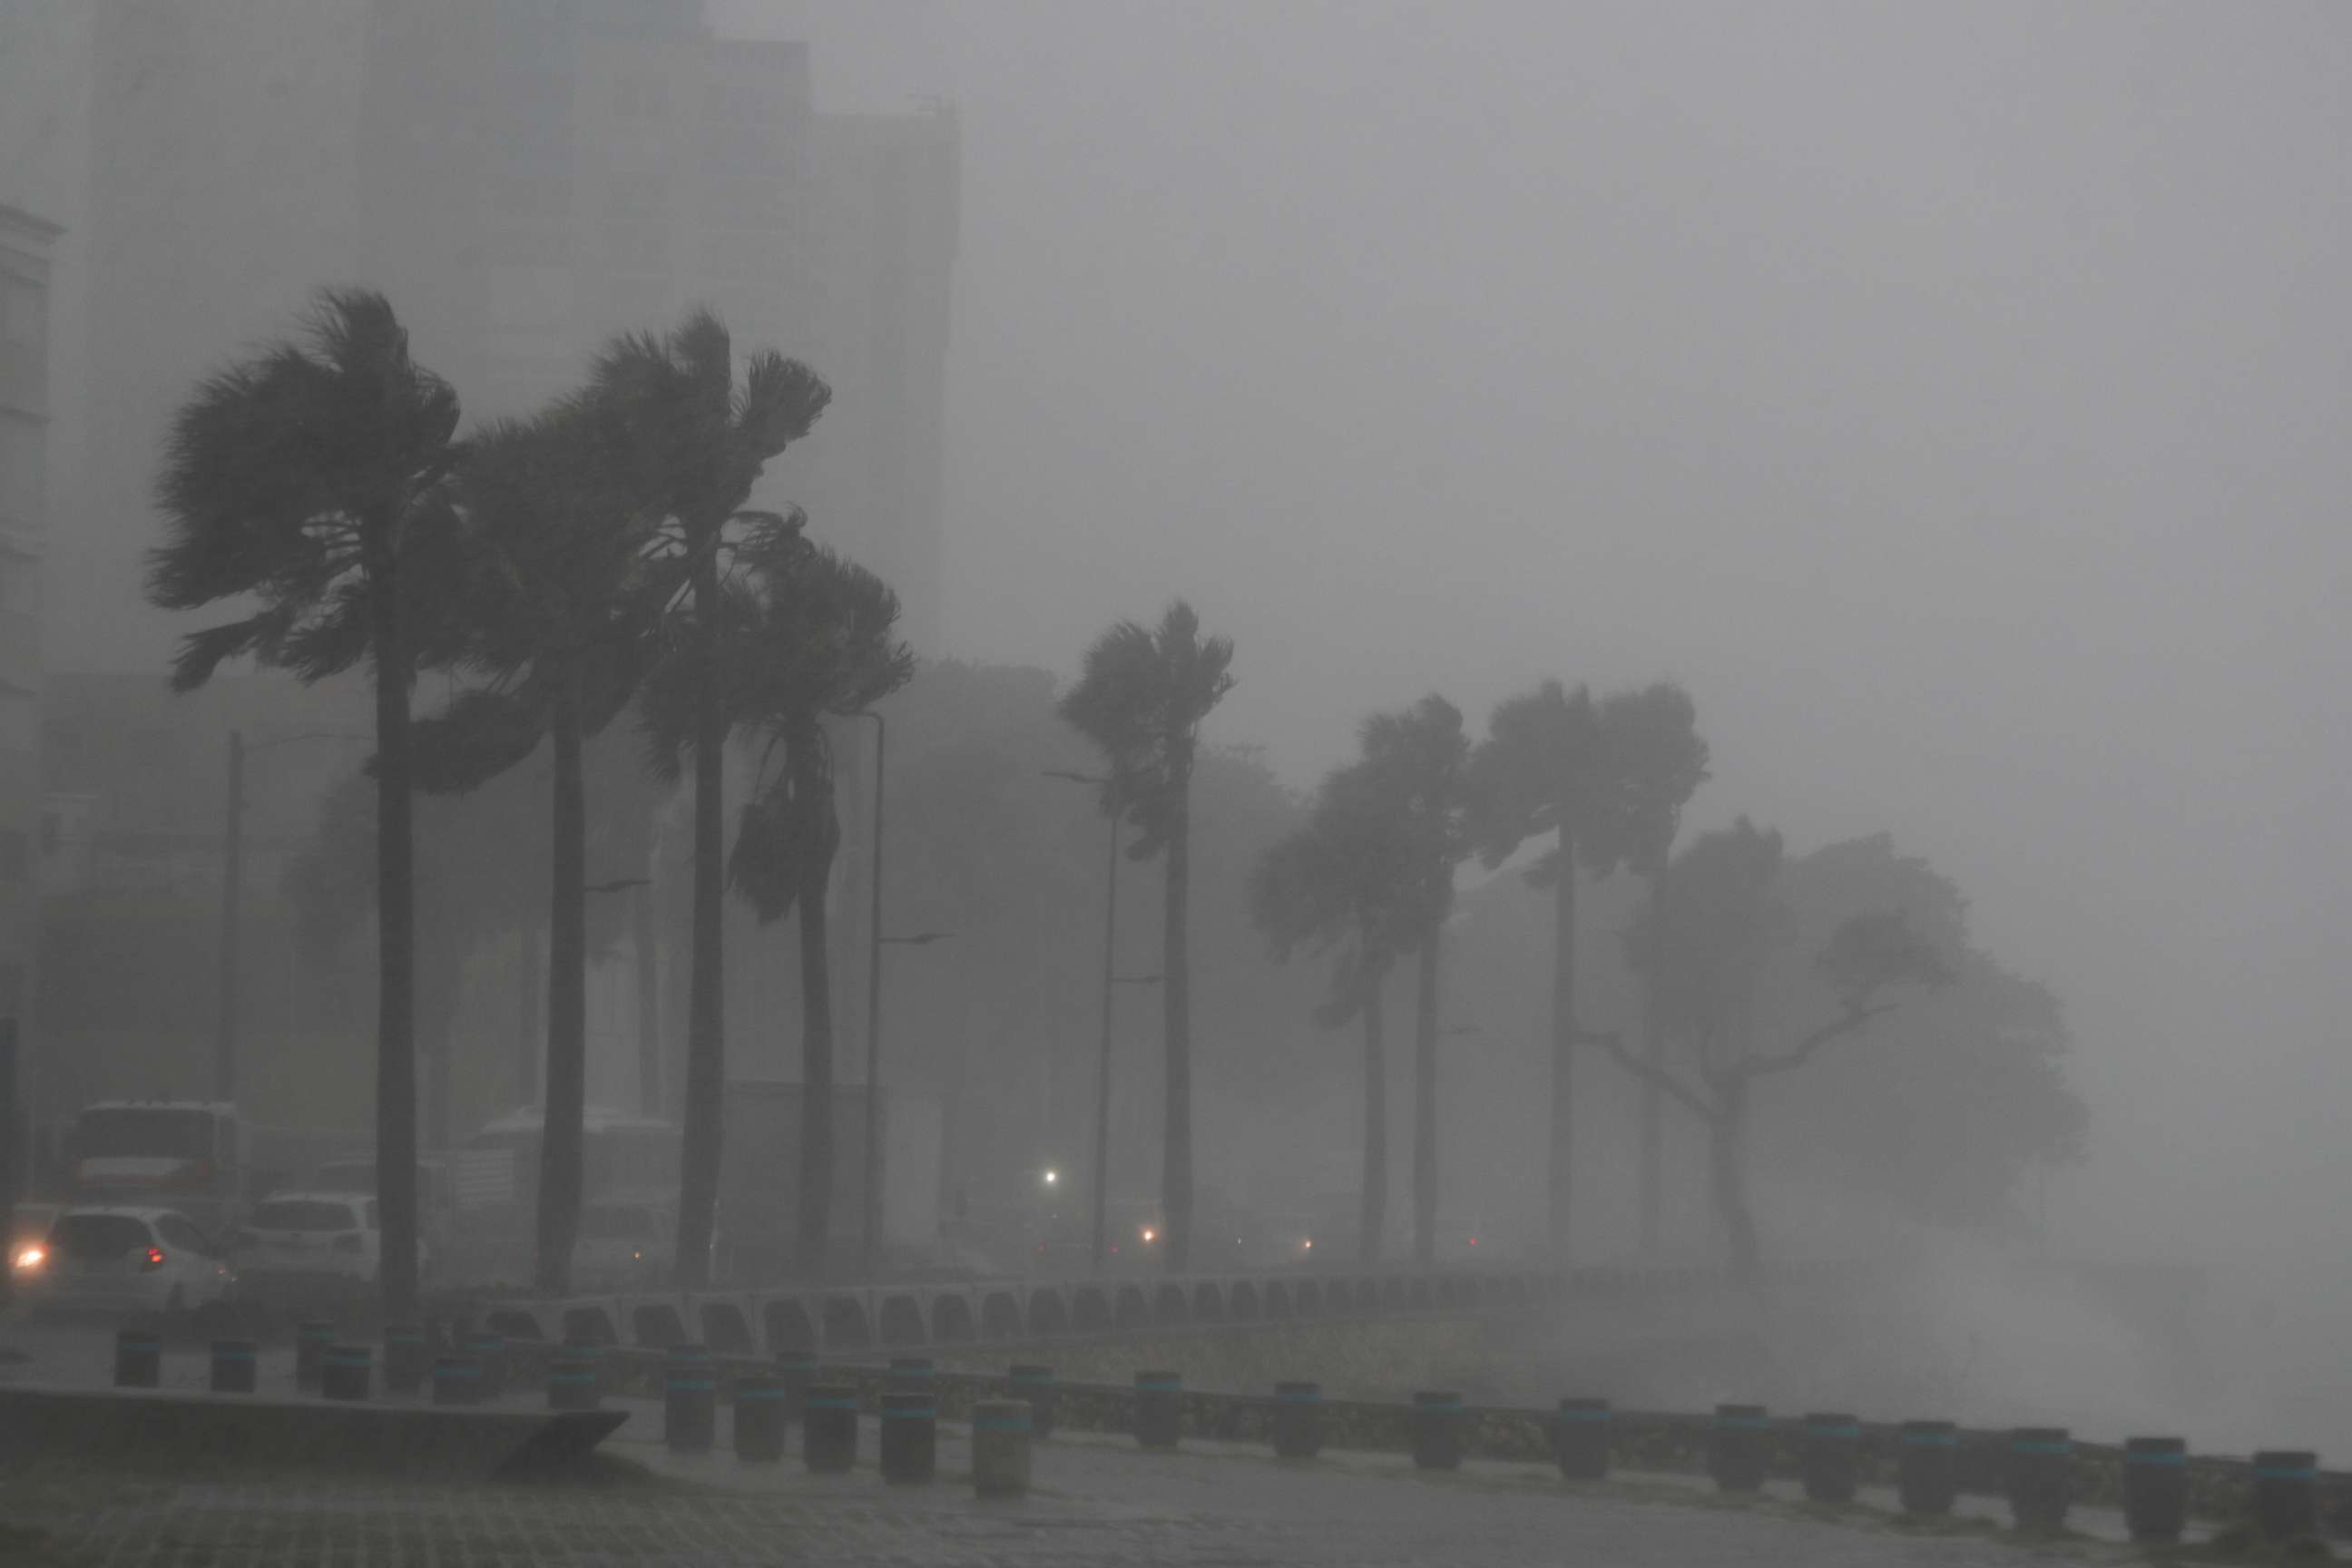 PHOTO: Palm trees sway in the wind and rain during the passage of Tropical Storm Fred in Santo Domingo, Dominican Republic August 11, 2021. REUTERS/Ricardo Rojas